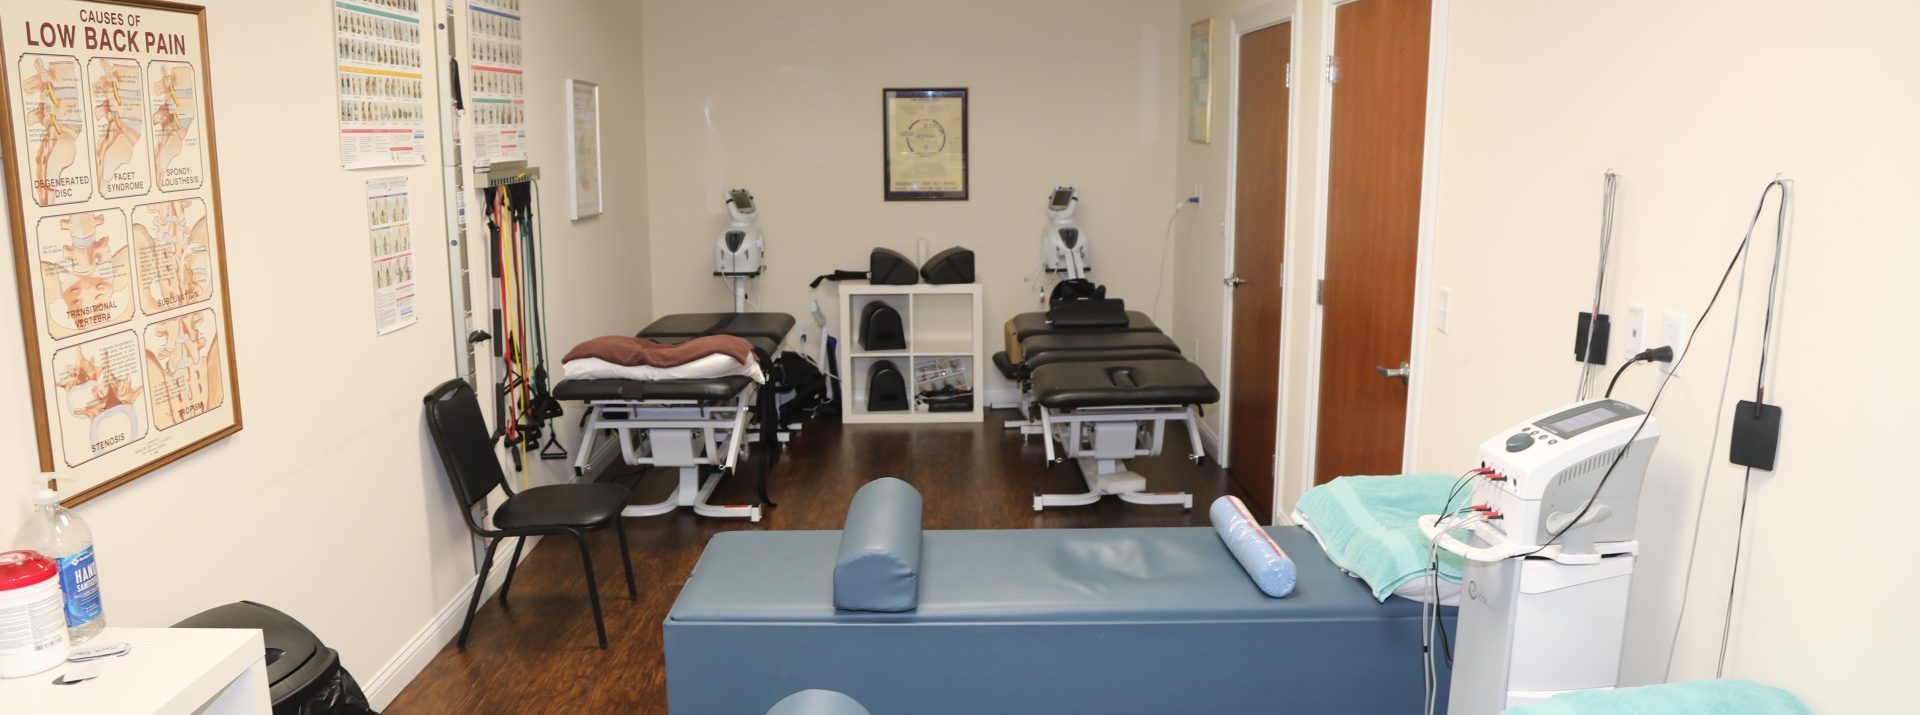 We offer highly
specialized treatments